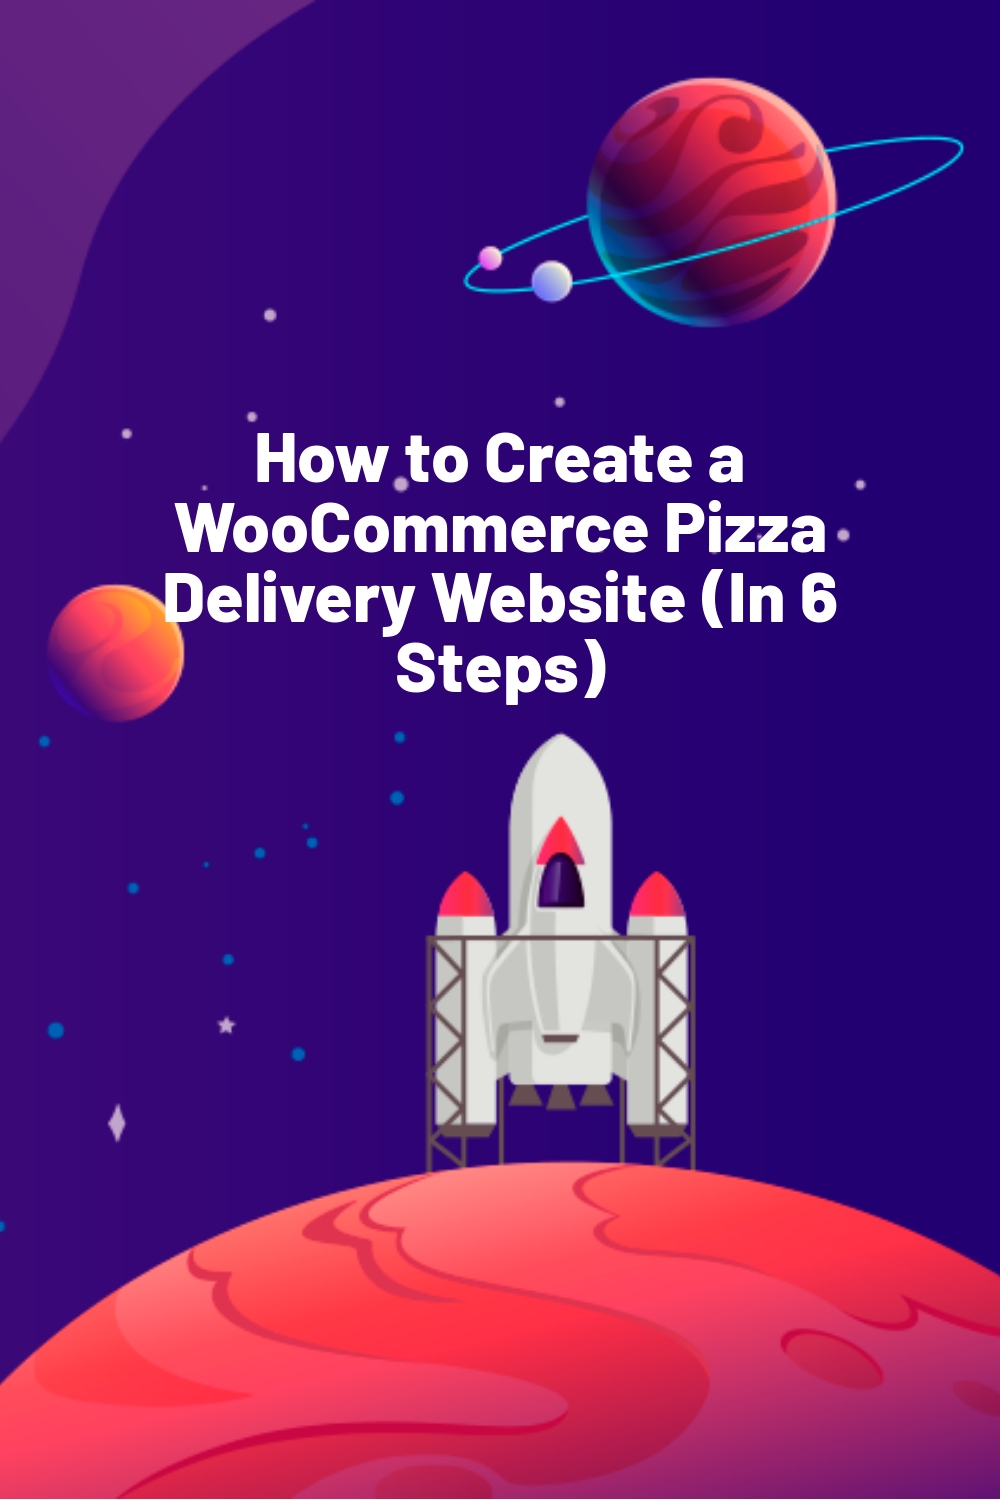 How to Create a WooCommerce Pizza Delivery Website (In 6 Steps)